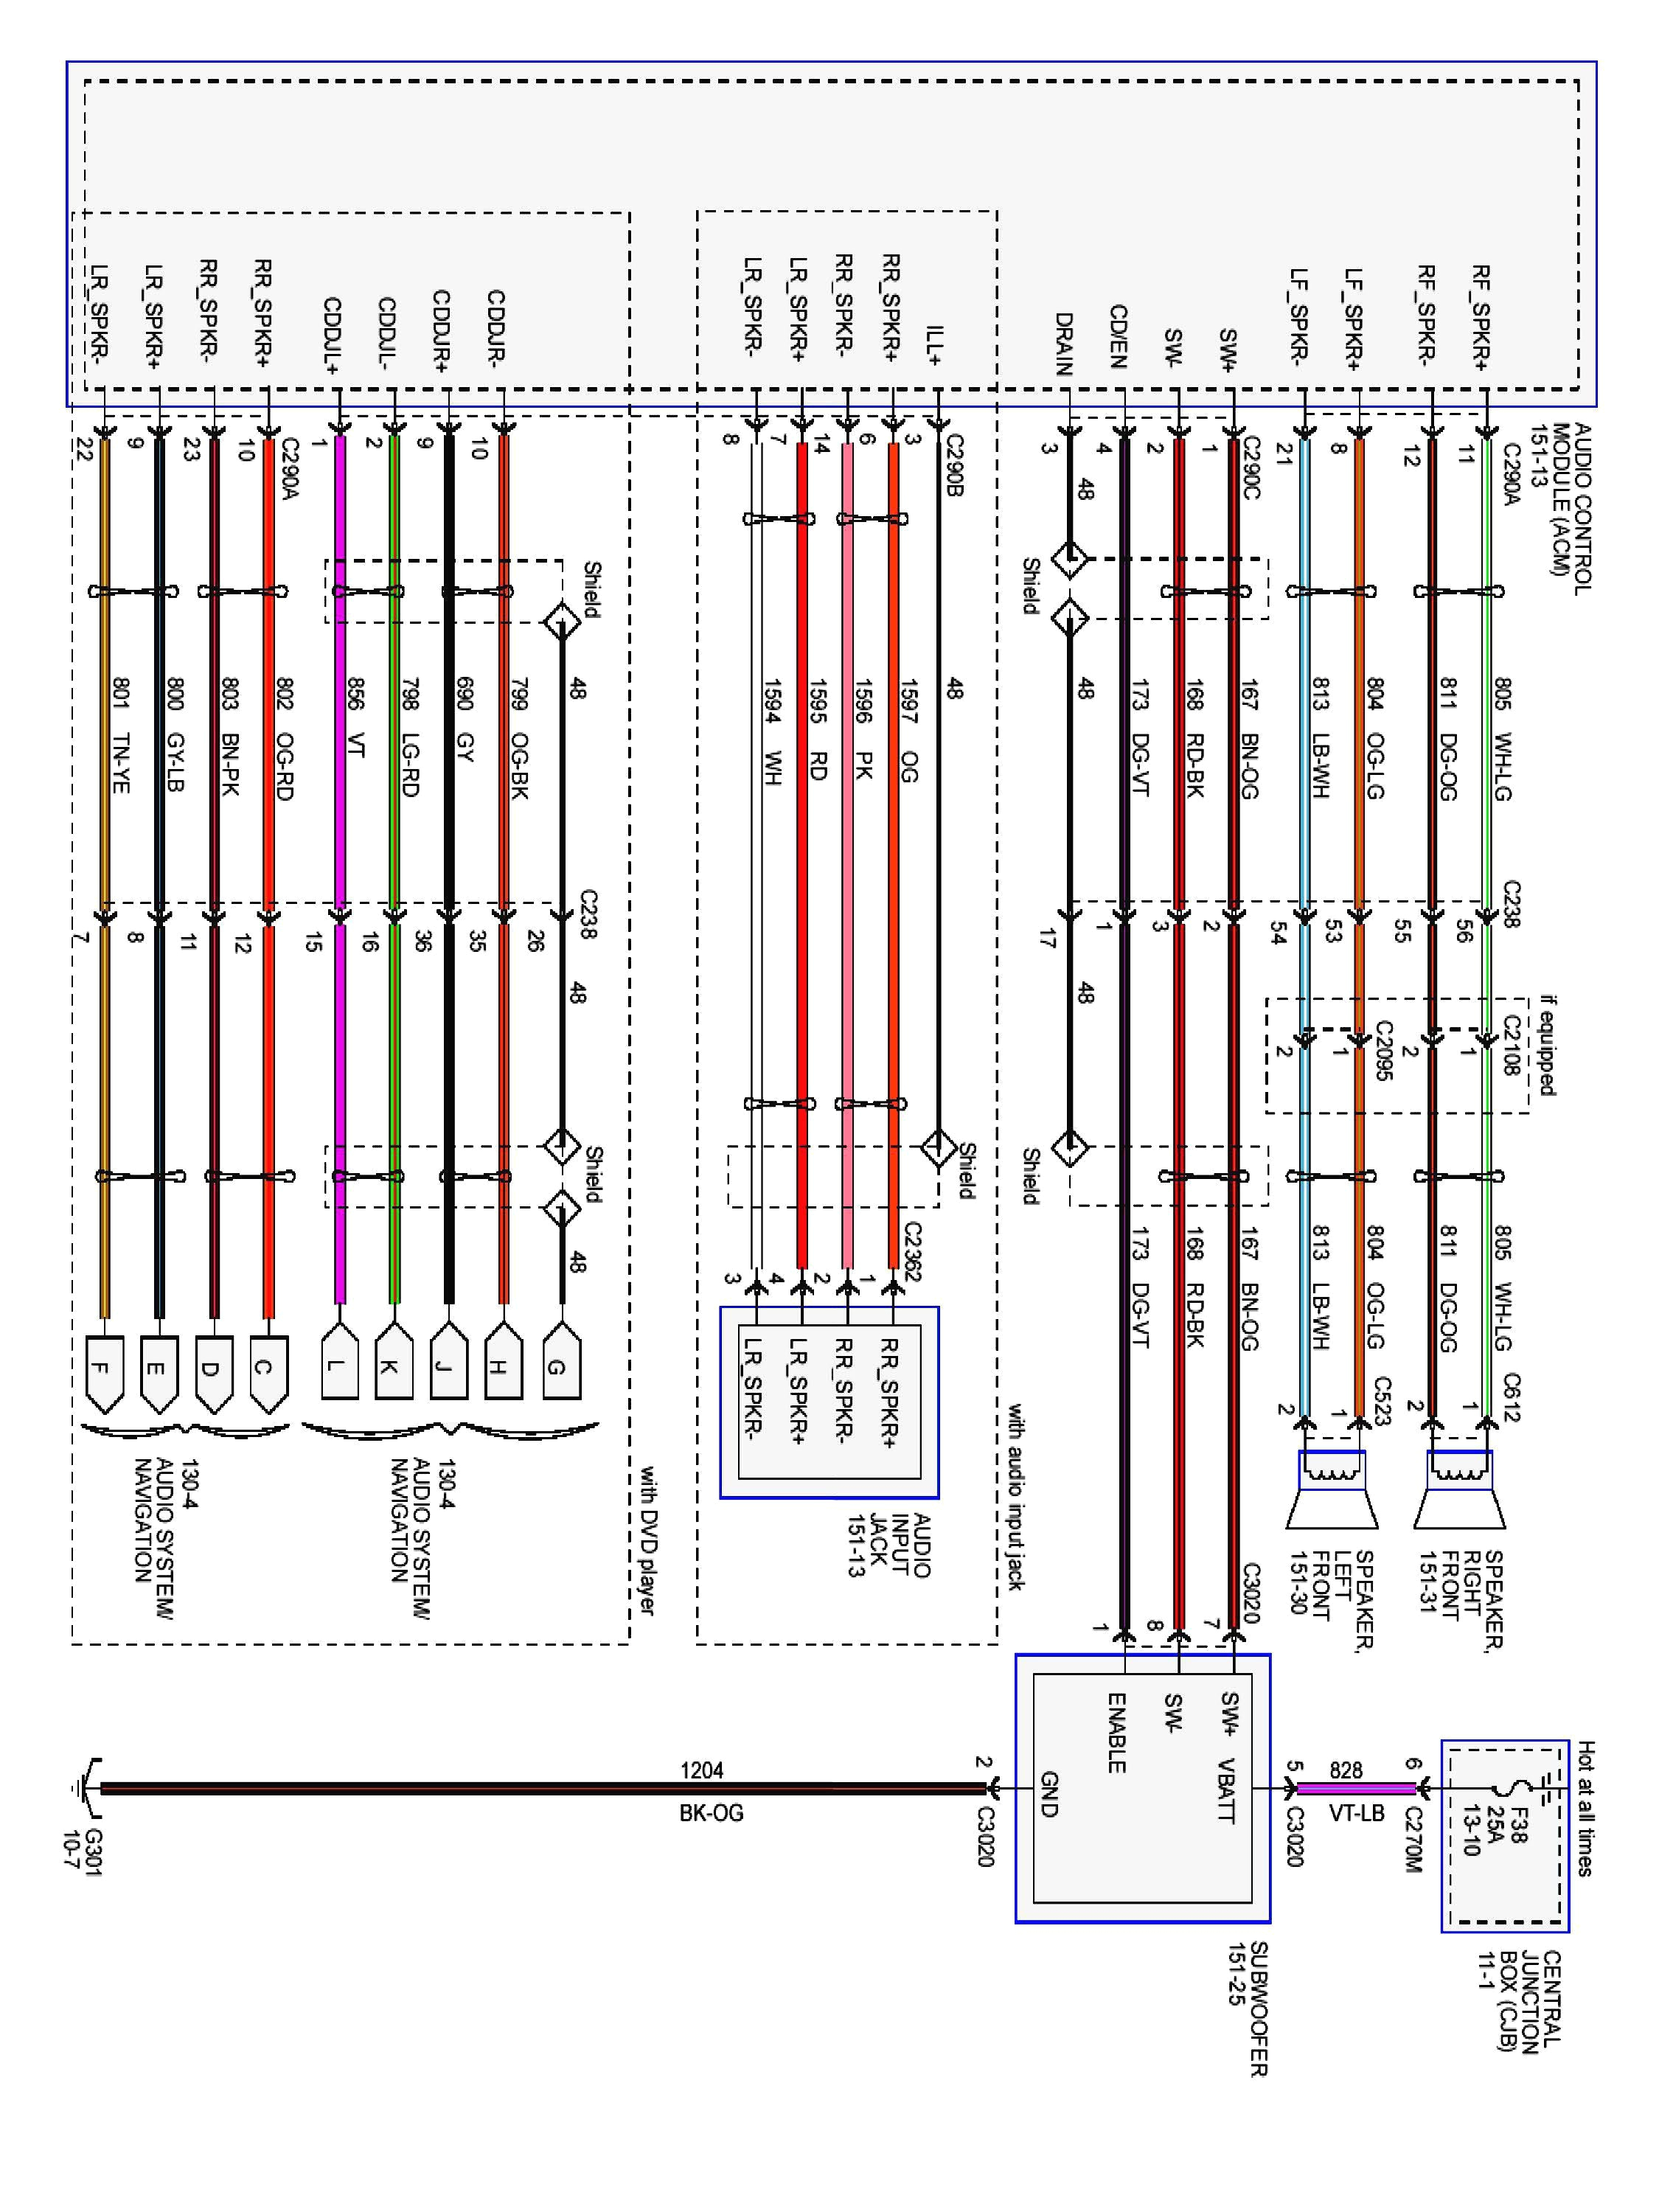 wiring diagram likewise vz modore as well wiring diagram operations wiring diagram likewise vz commodore as well